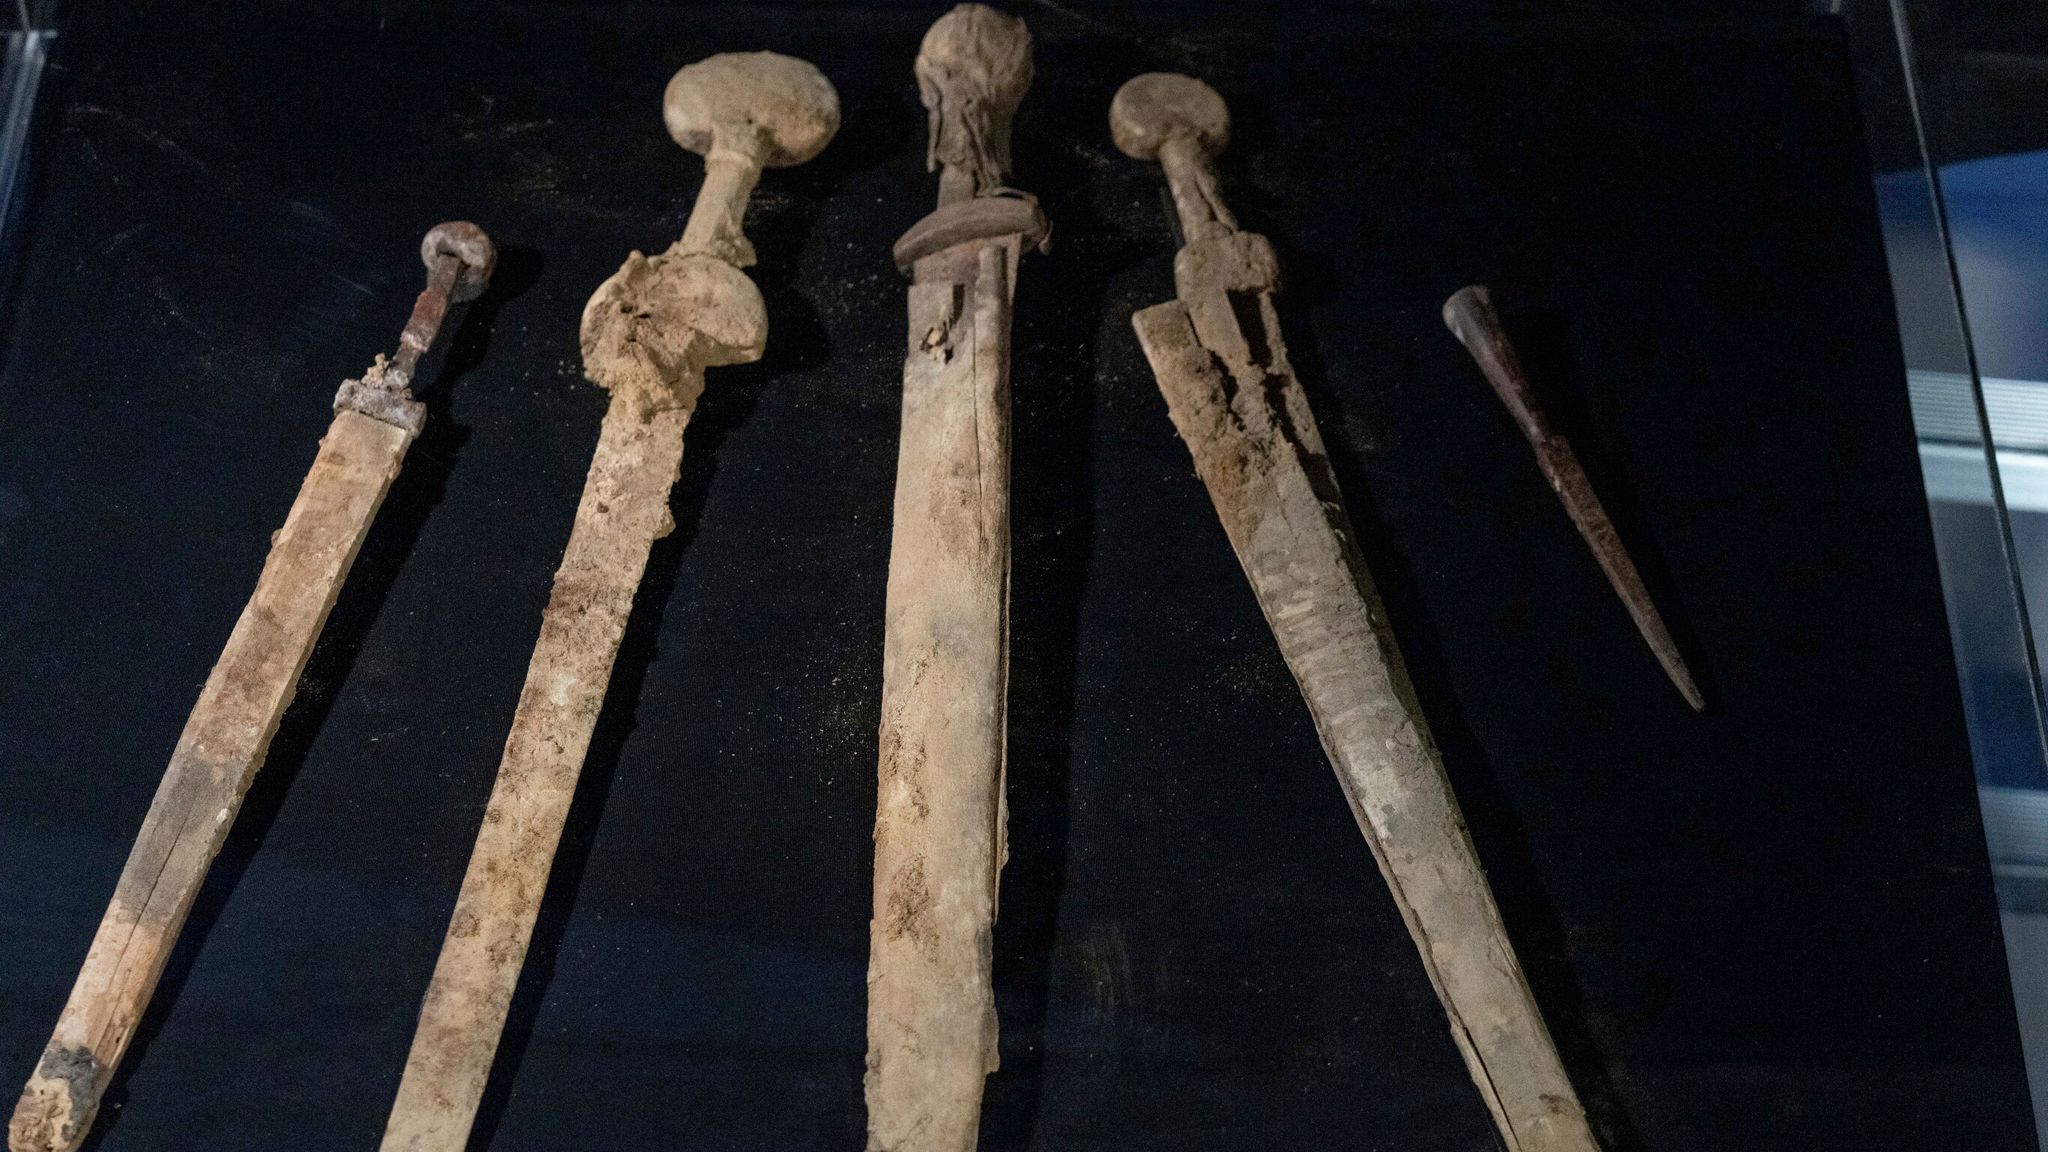 Four 1,900-year-old Roman swords found in Judean Desert, likely